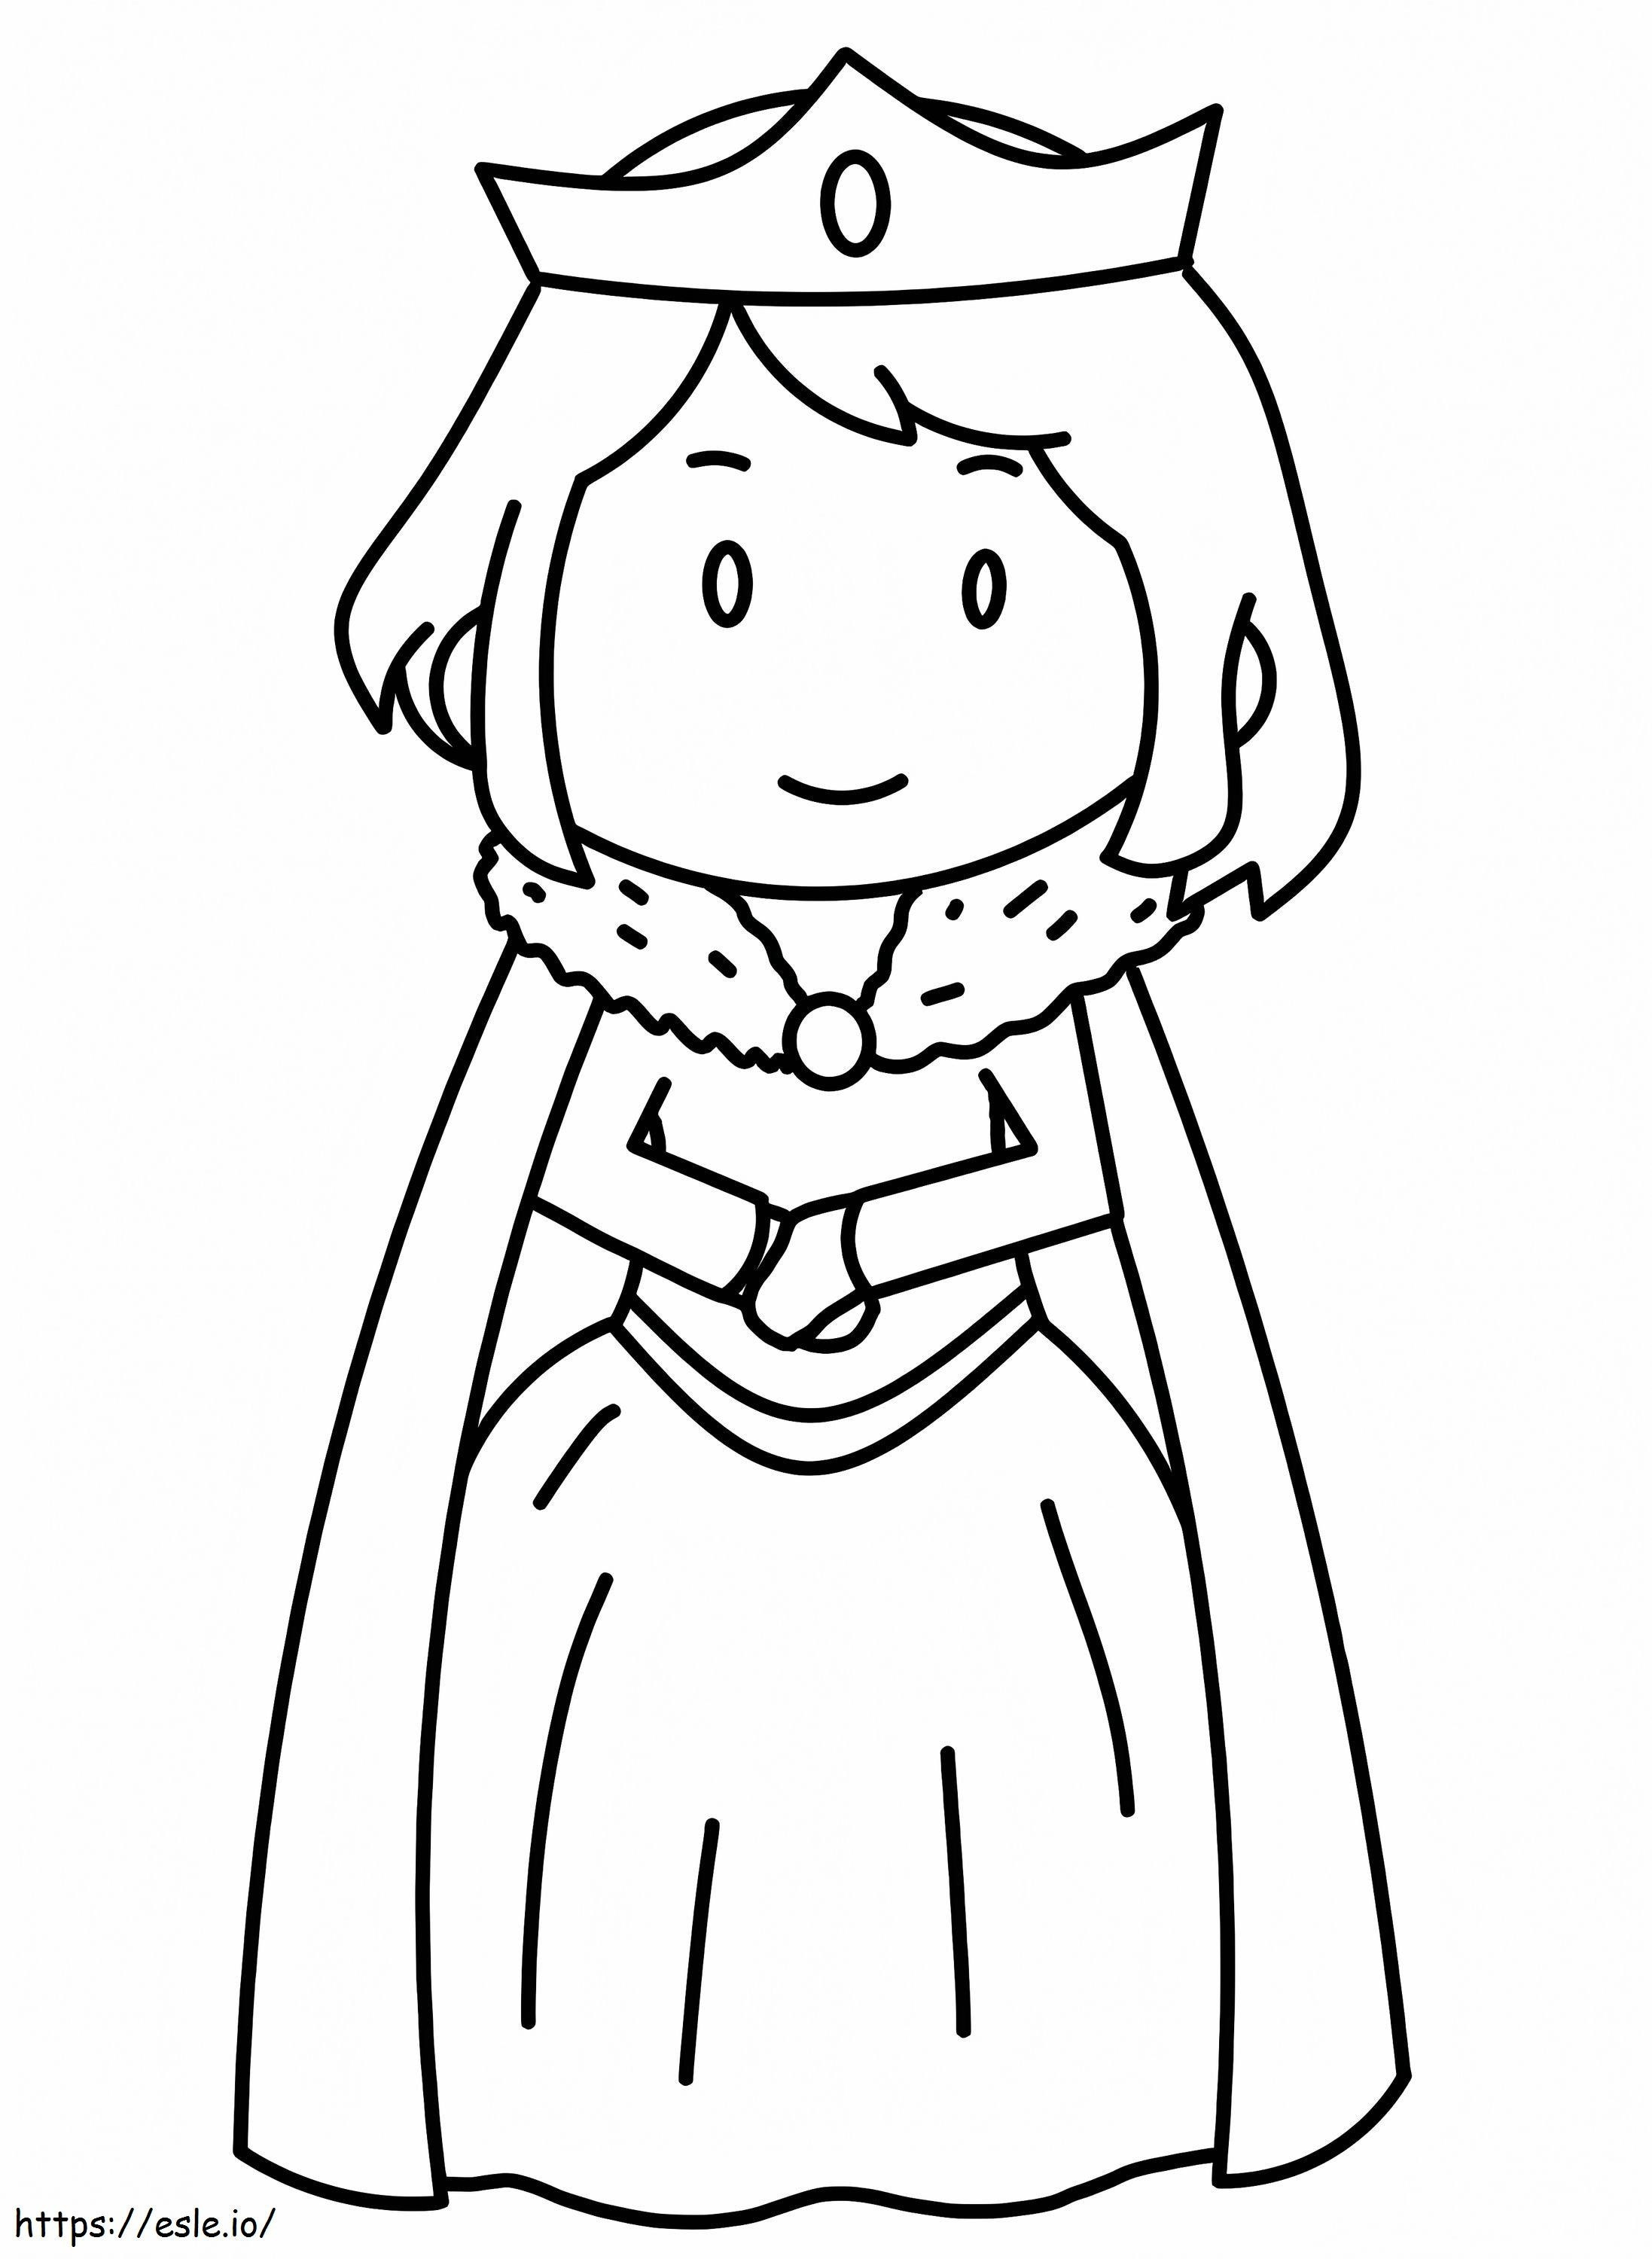 Cute Queen coloring page